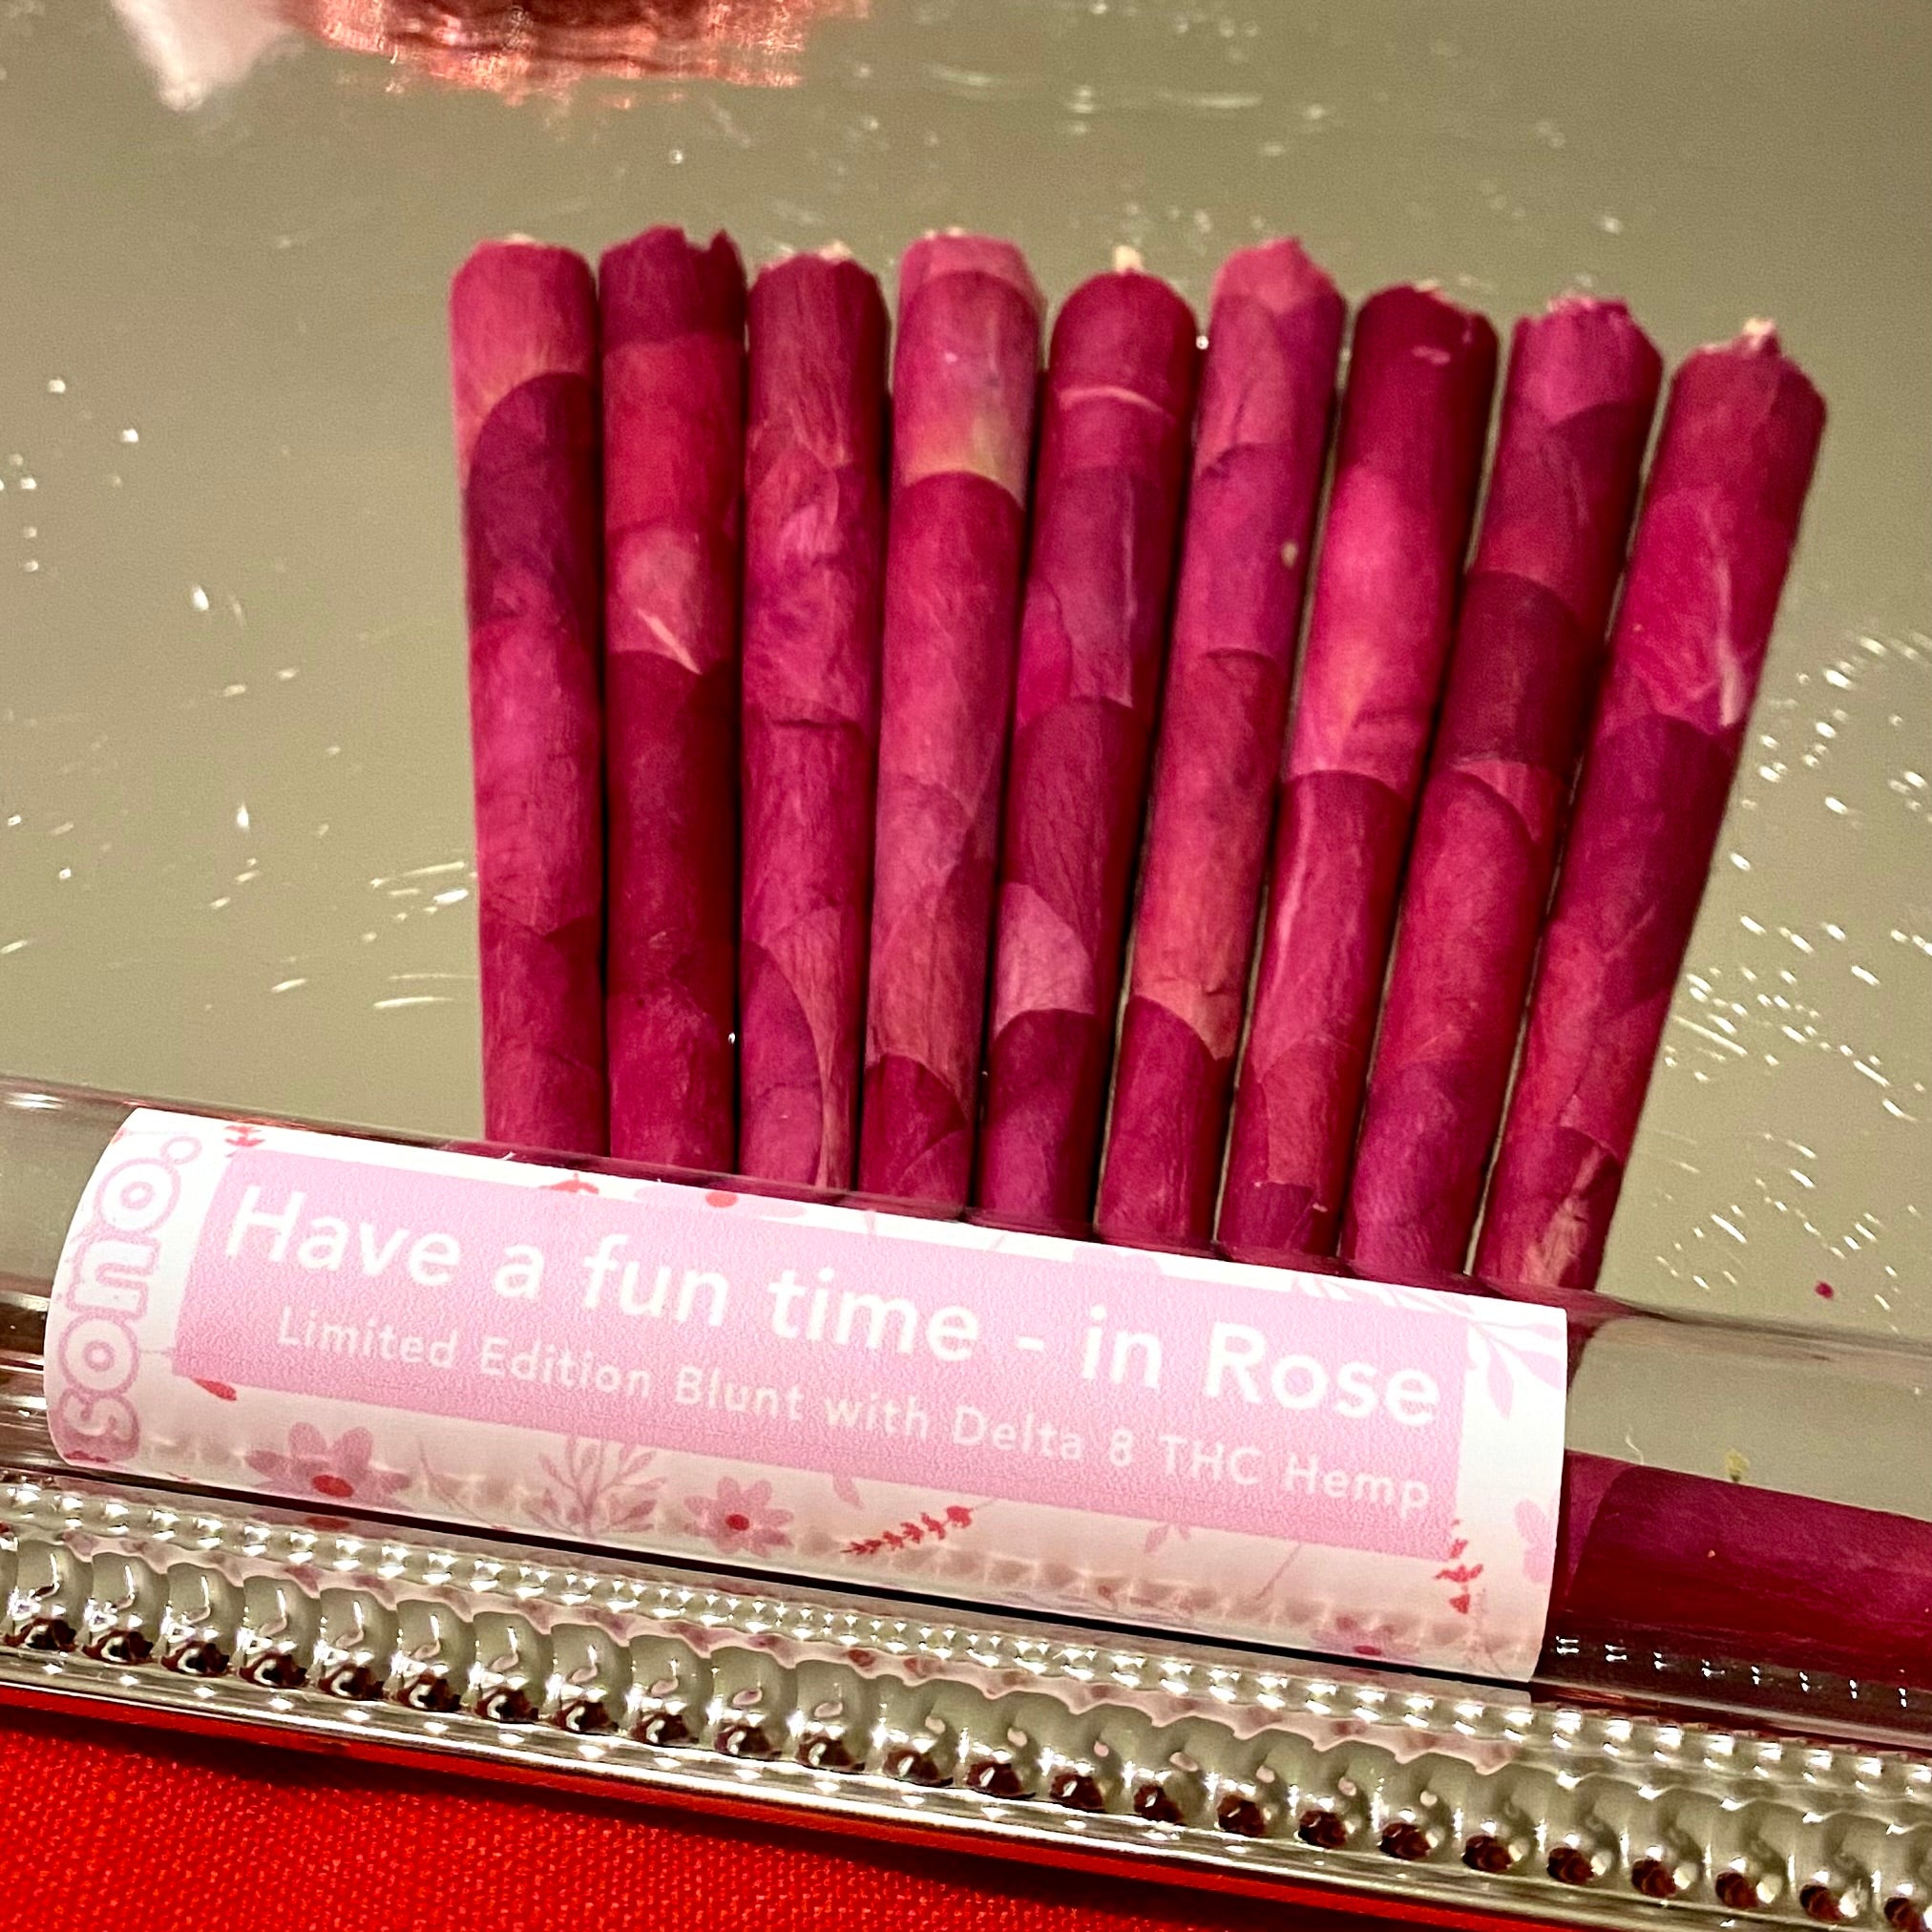 Have a Fun Time - in Rose | Limited Edition Rose Blunt with Delta 8 THC Hemp